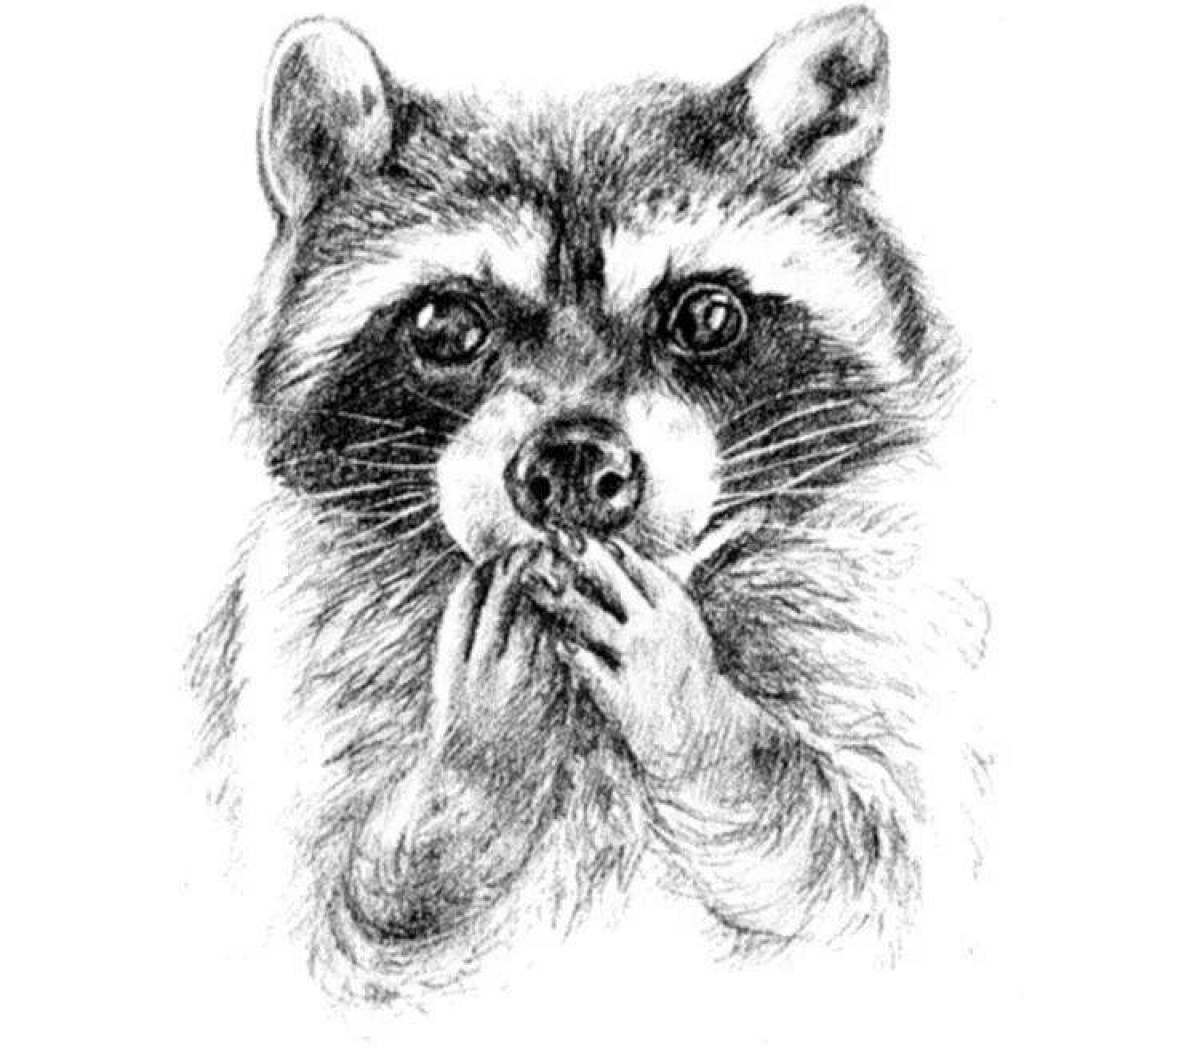 Attractive coloring of a raccoon